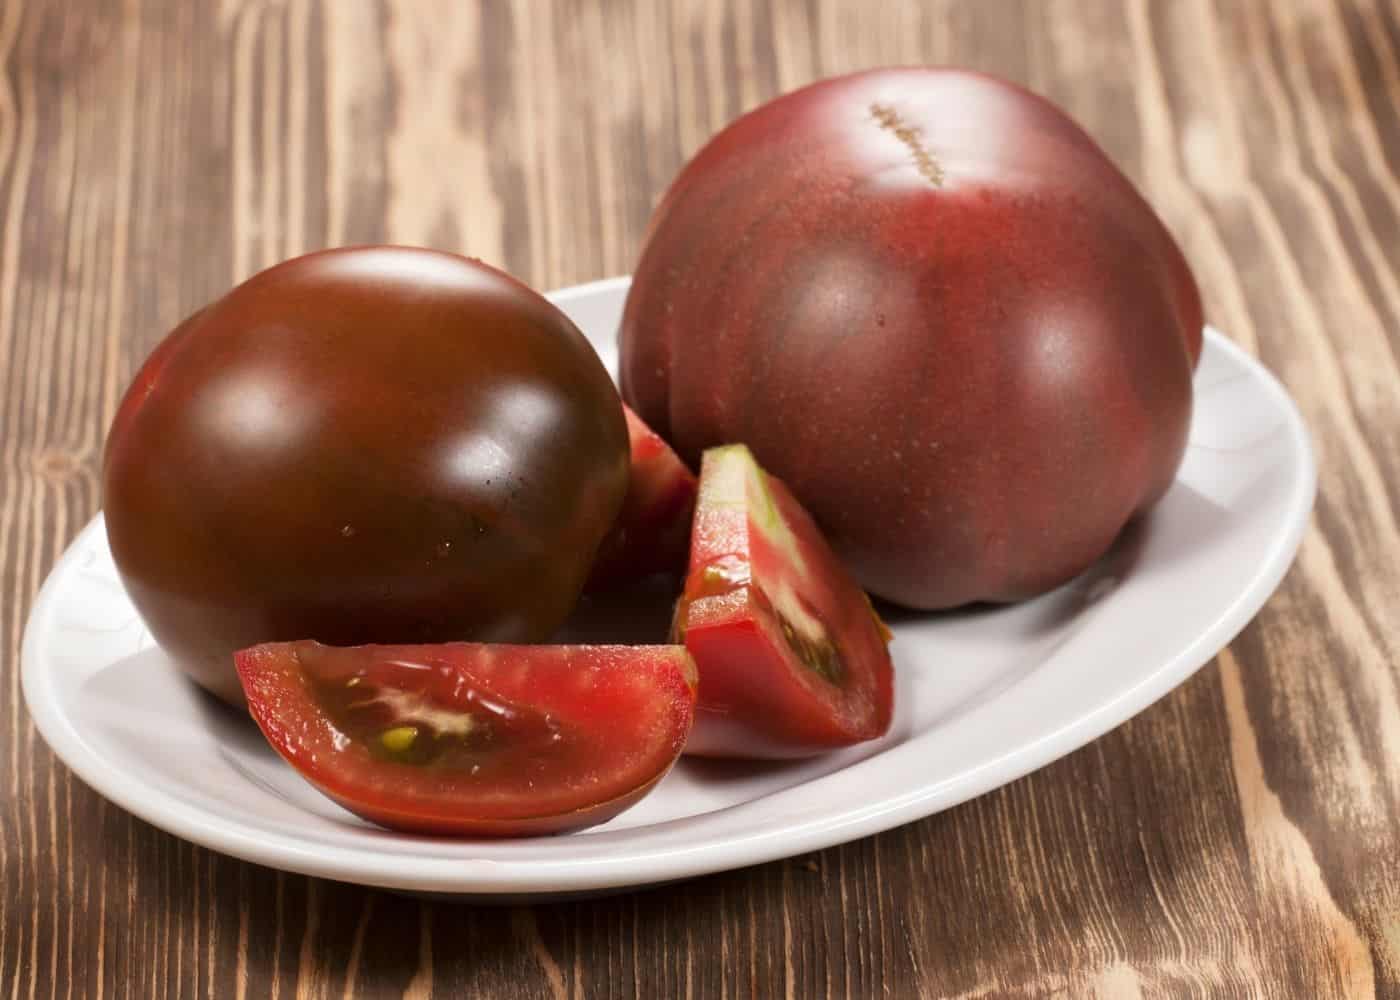 Wine Jug Tomato 10 Seeds!!! Plum-shaped Fruits with Complex Sweet Flavour 